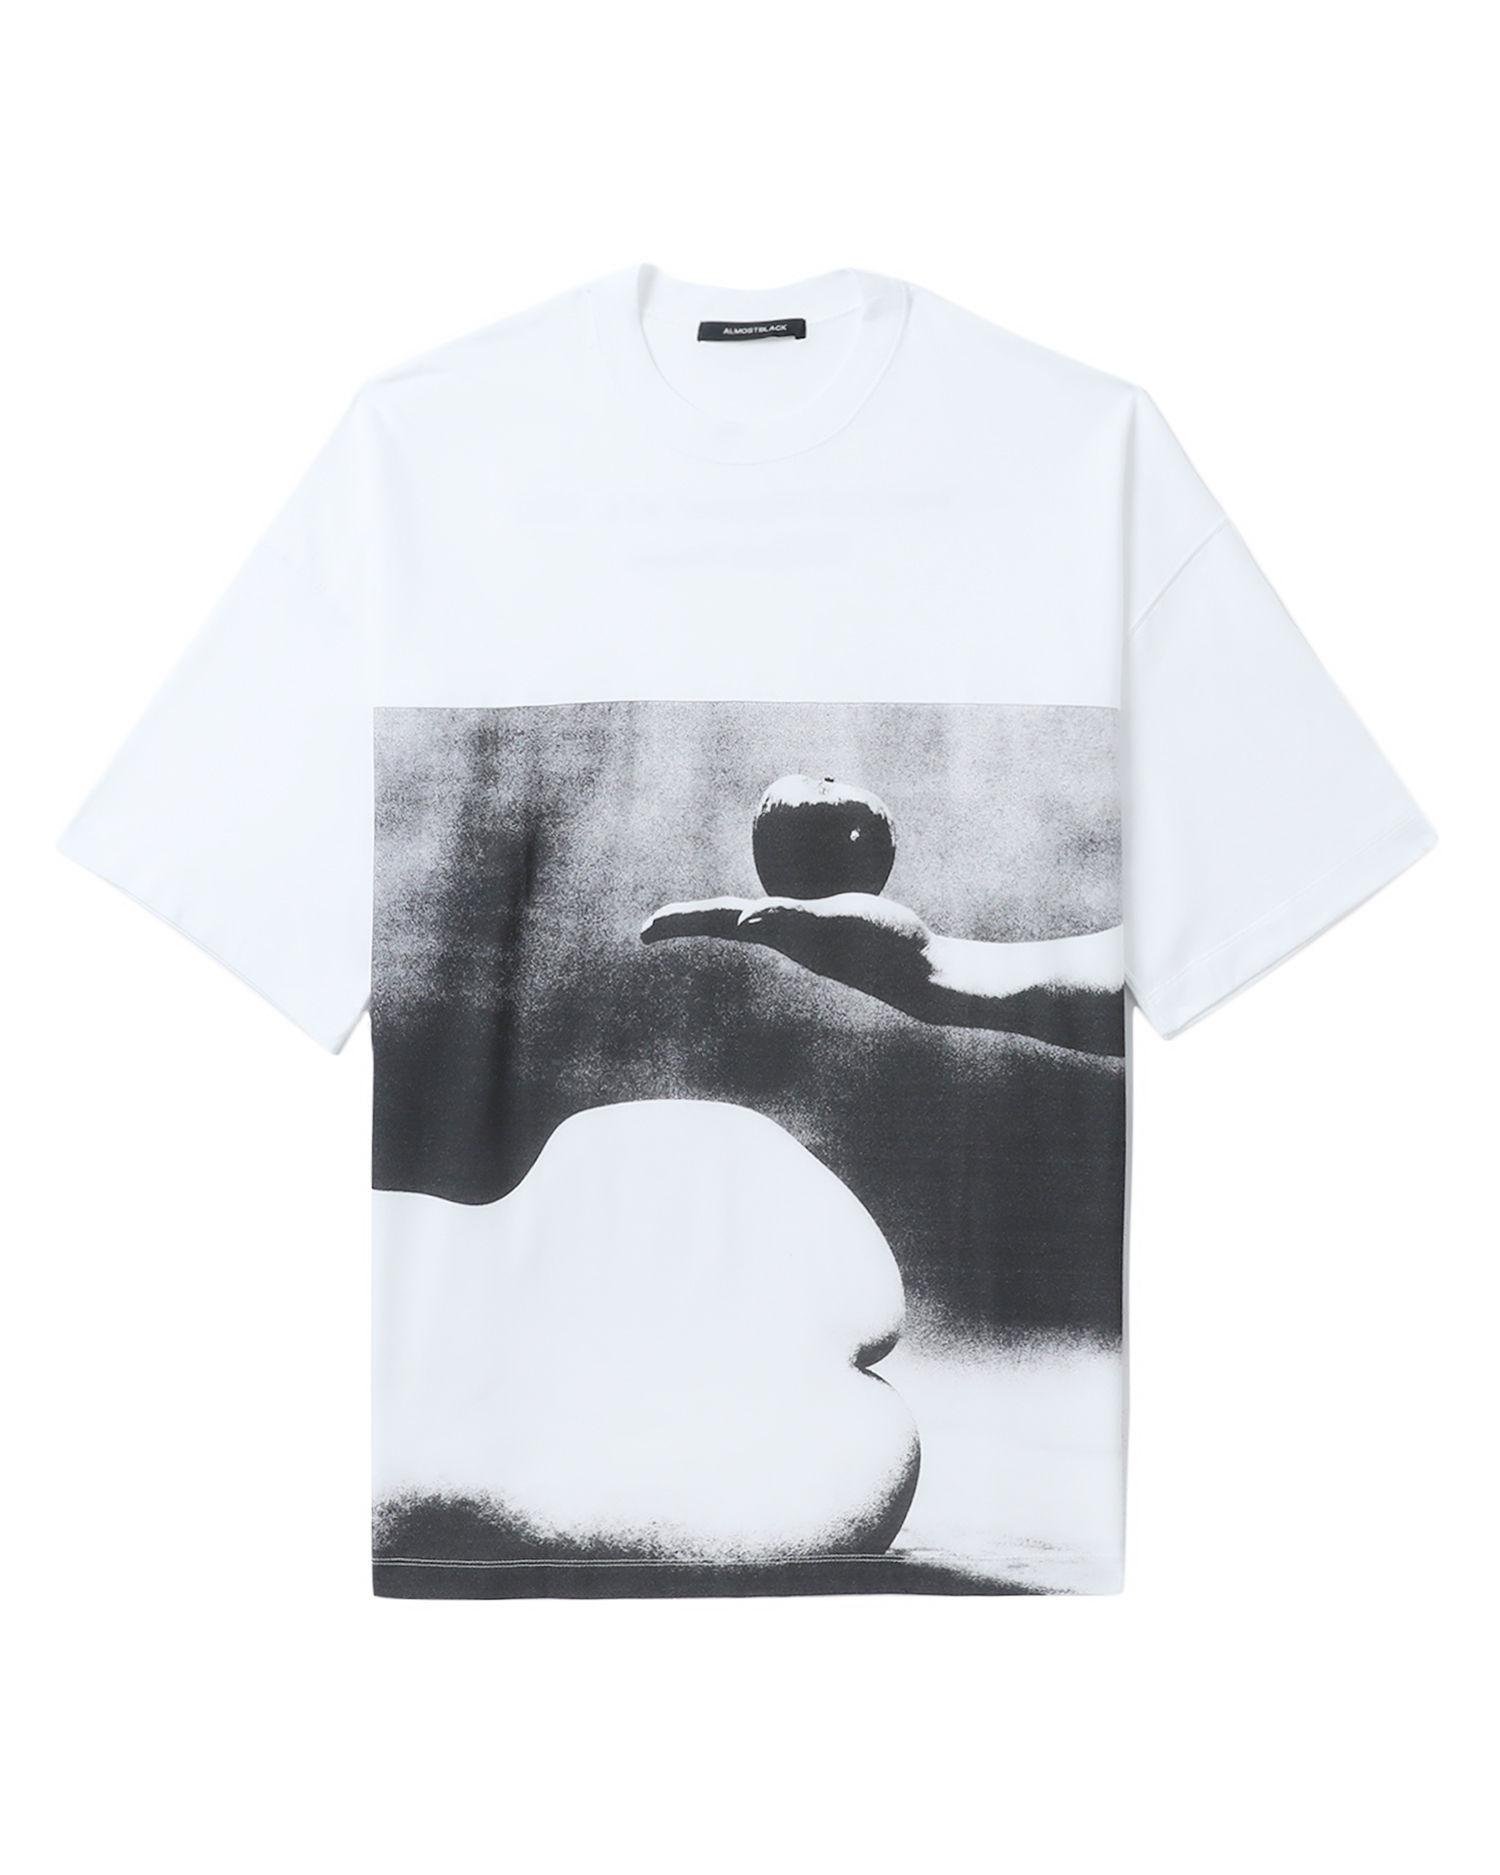 Graphic tee by ALMOSTBLACK